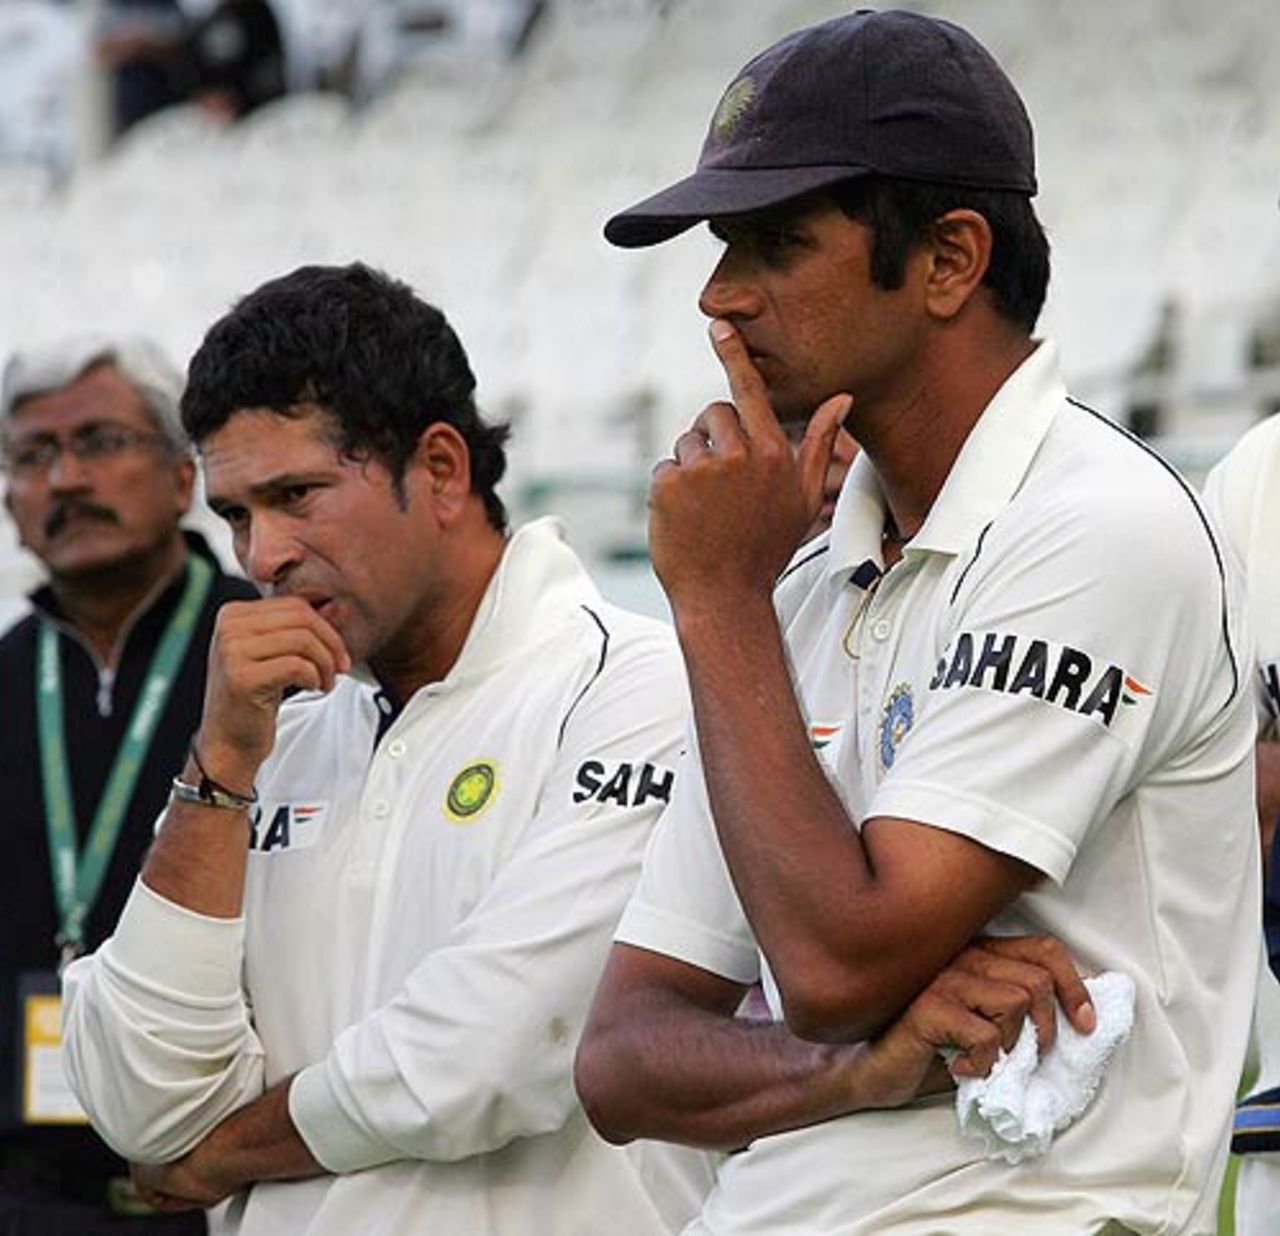 Sachin Tendulkar and Rahul Dravid try to come to terms with the defeat, South Africa v India, 3rd Test, Cape Town, 5th day, January 6, 2007